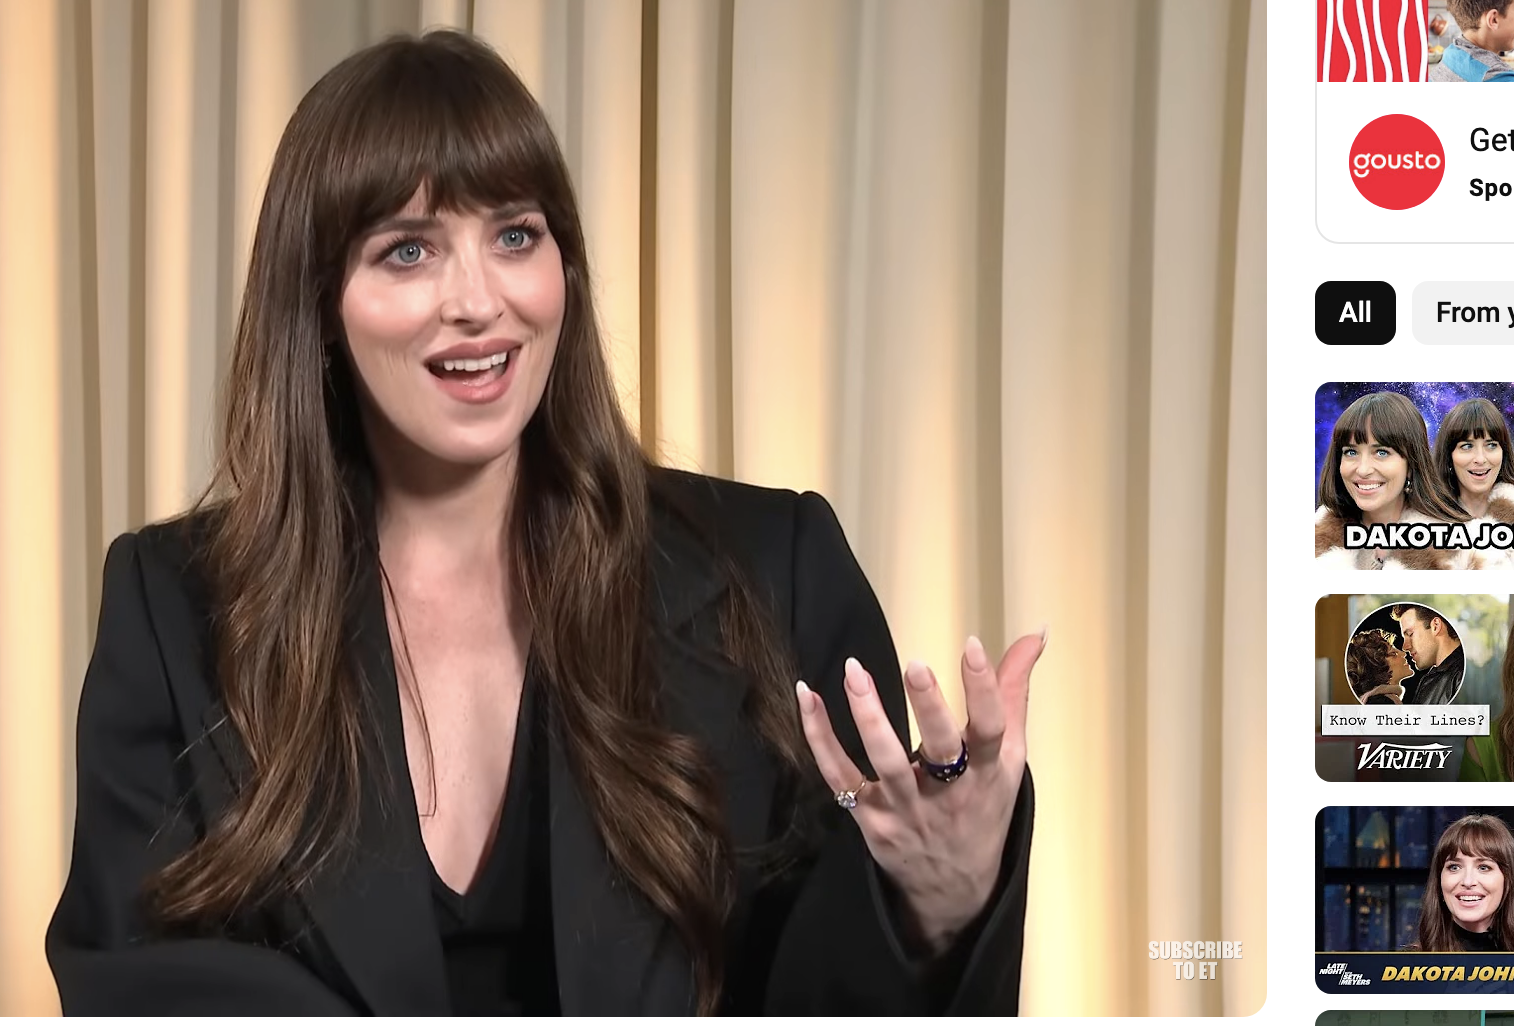 Dakota Johnson in an interview, gesturing with her hands, seated indoors with a plant and TV screen in the background